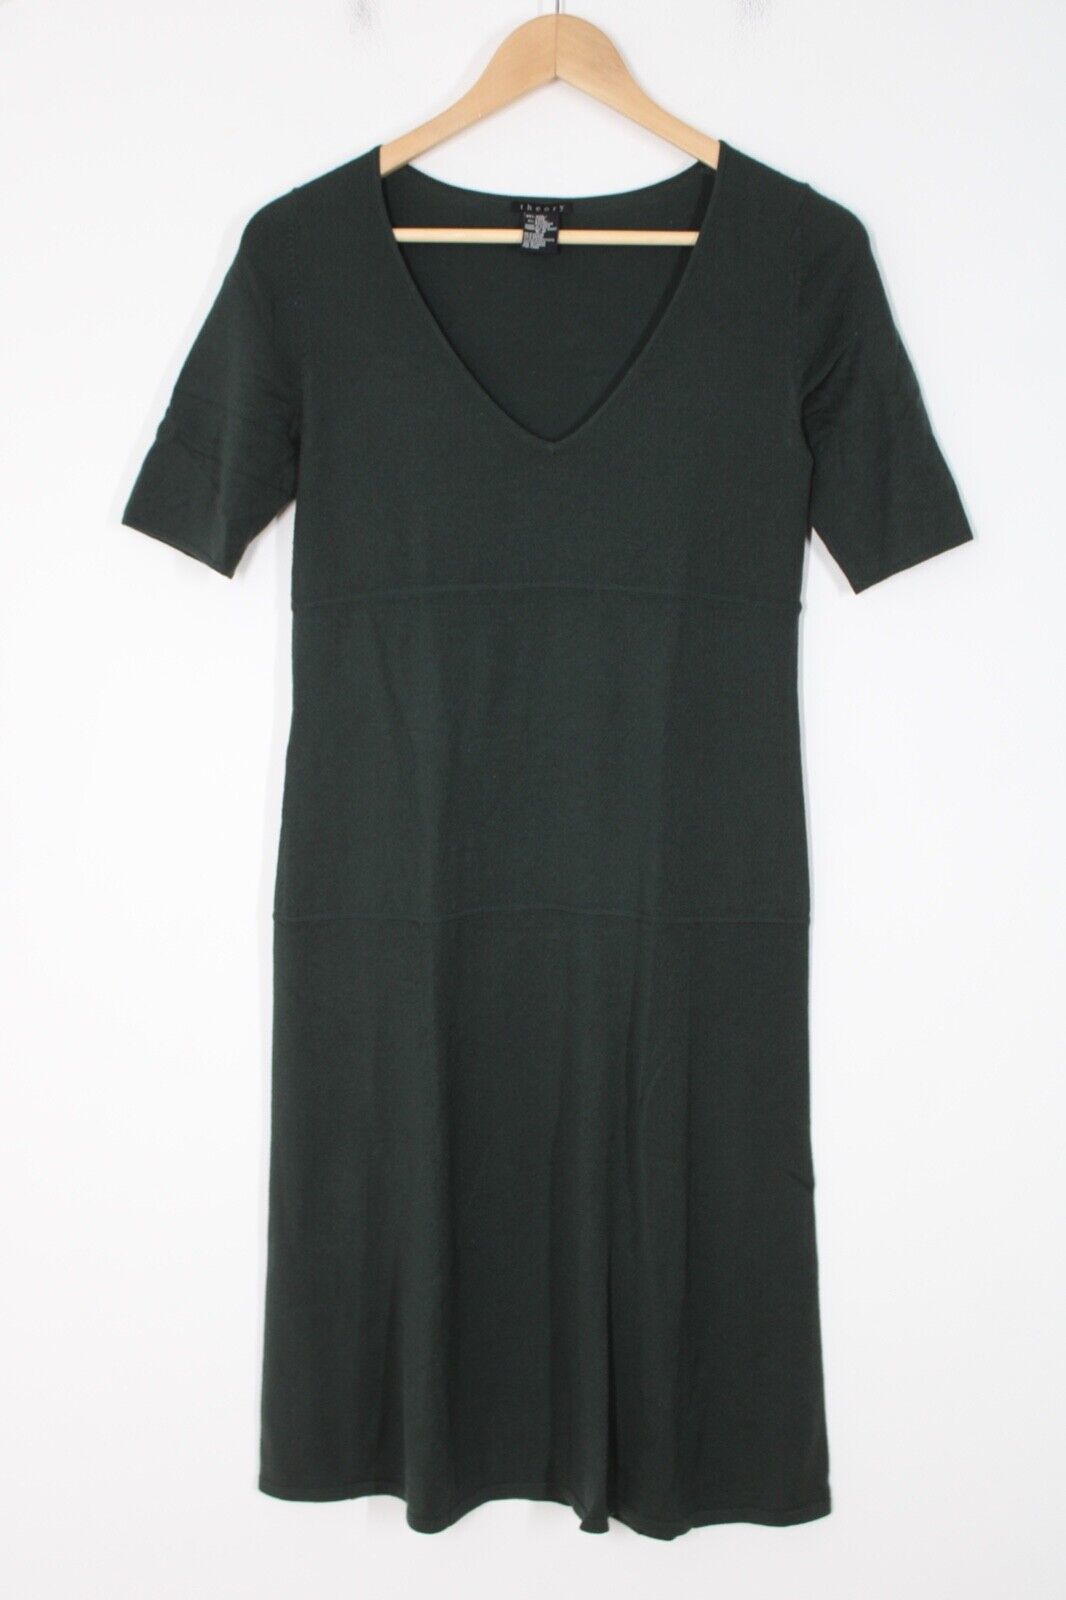 Primary image for Theory S Green Wool Stretch Knit V-Neck Short Sleeve Midi Dress Holes Mend